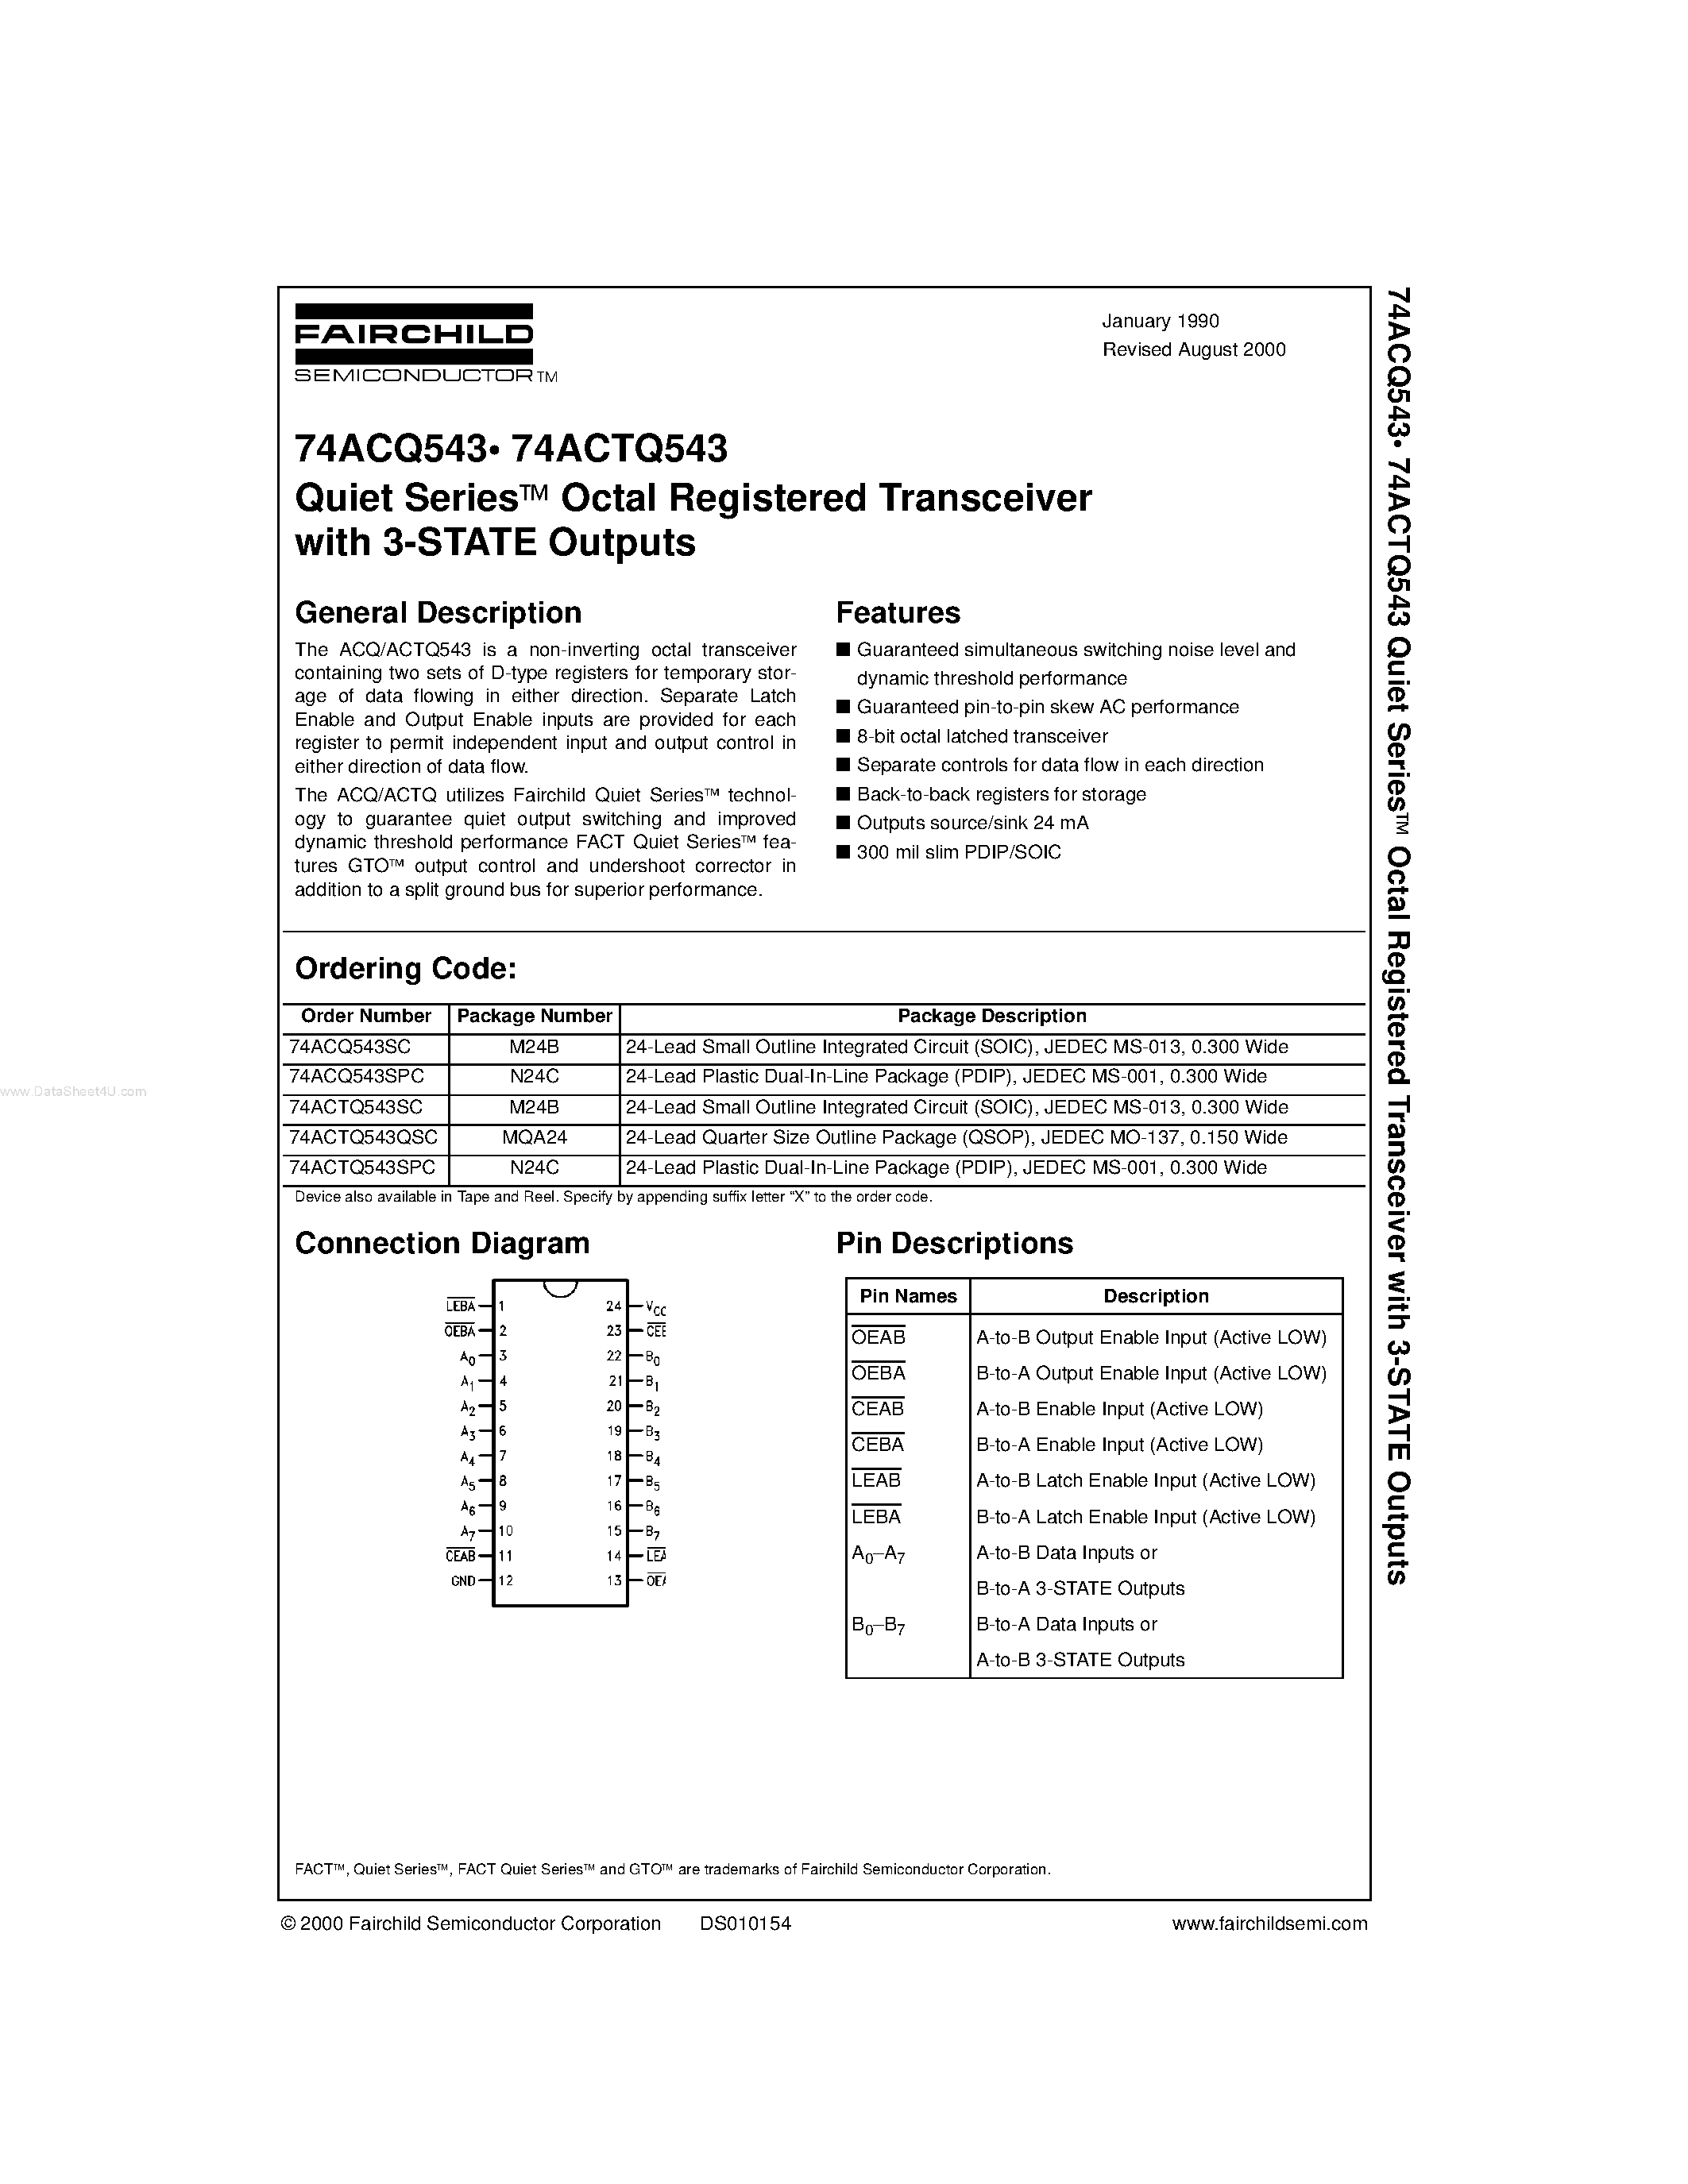 Datasheet 74ACQ543SPC - Quiet Series Octal Registered Transceiver with 3-STATE Outputs page 1